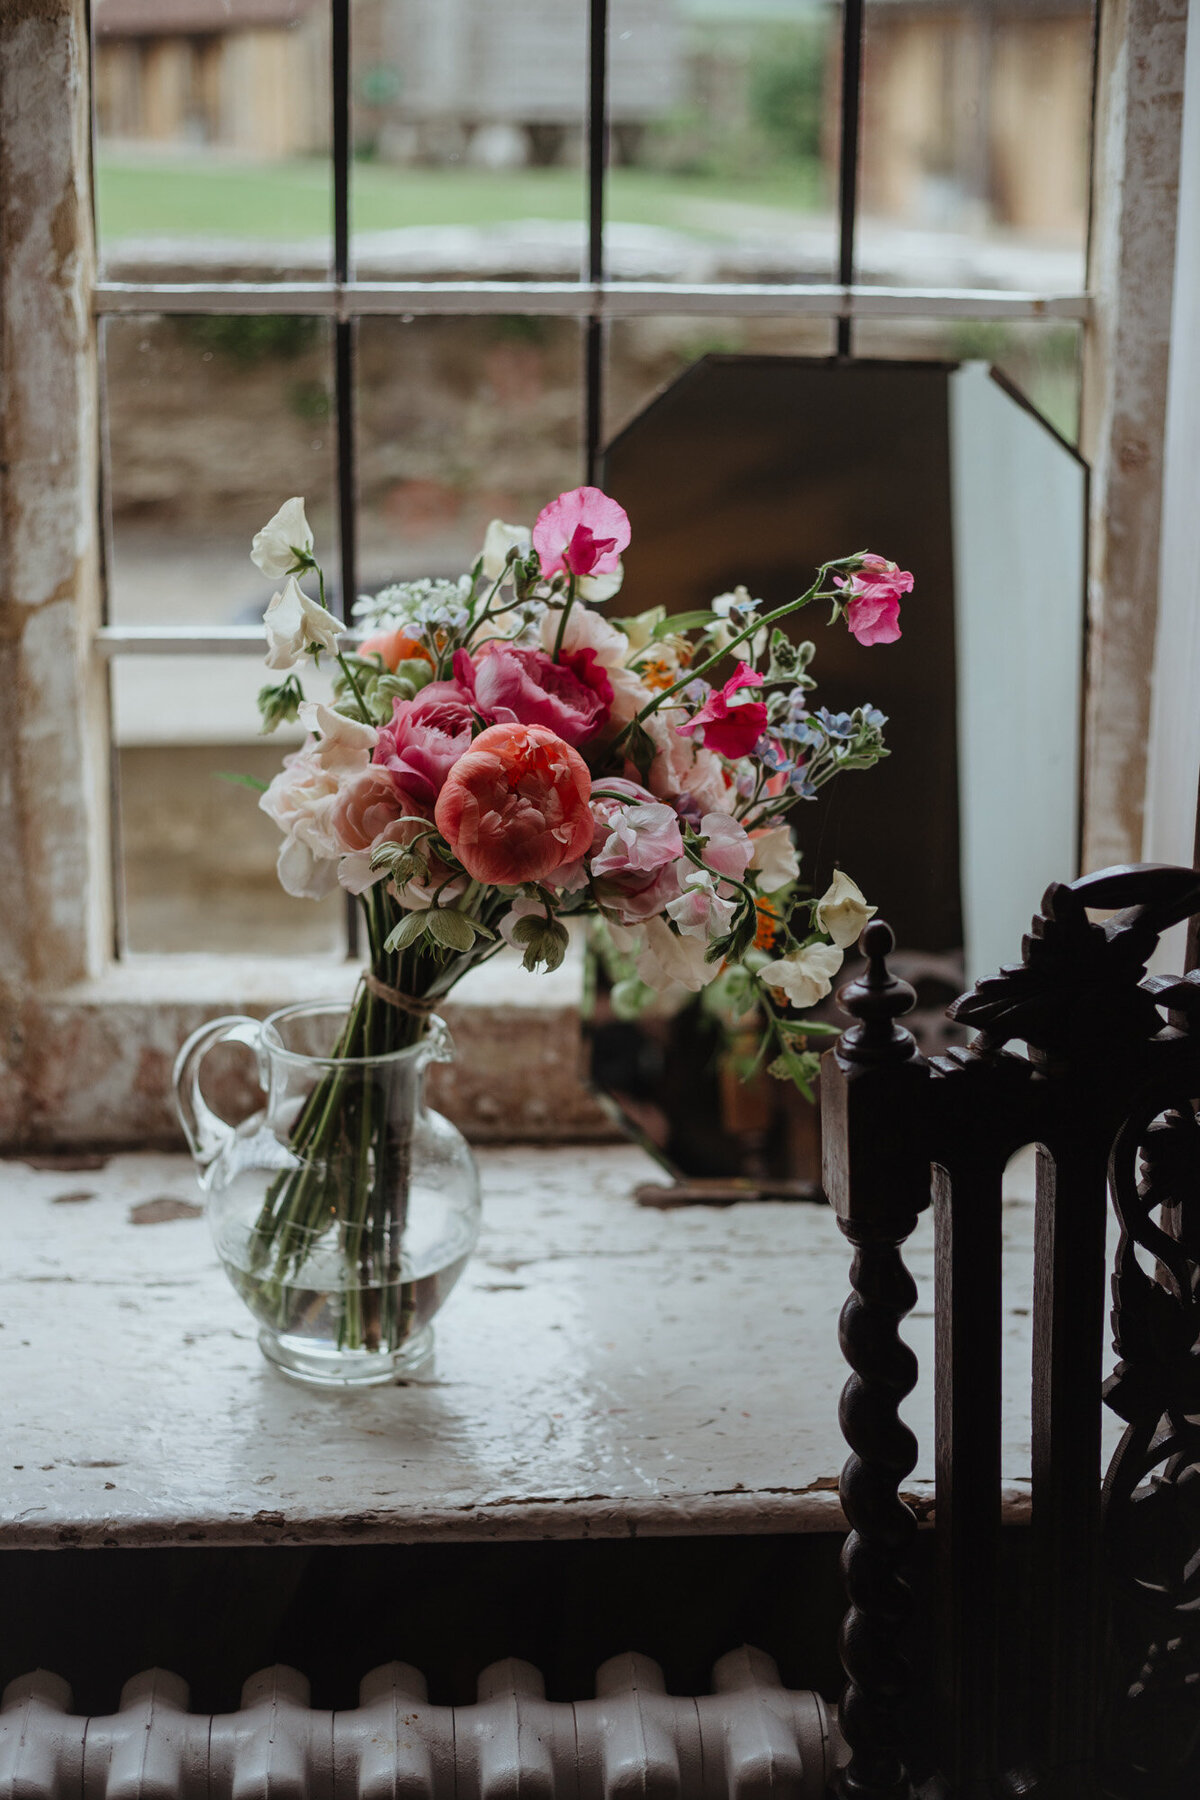 photo of the bouquet in a vase